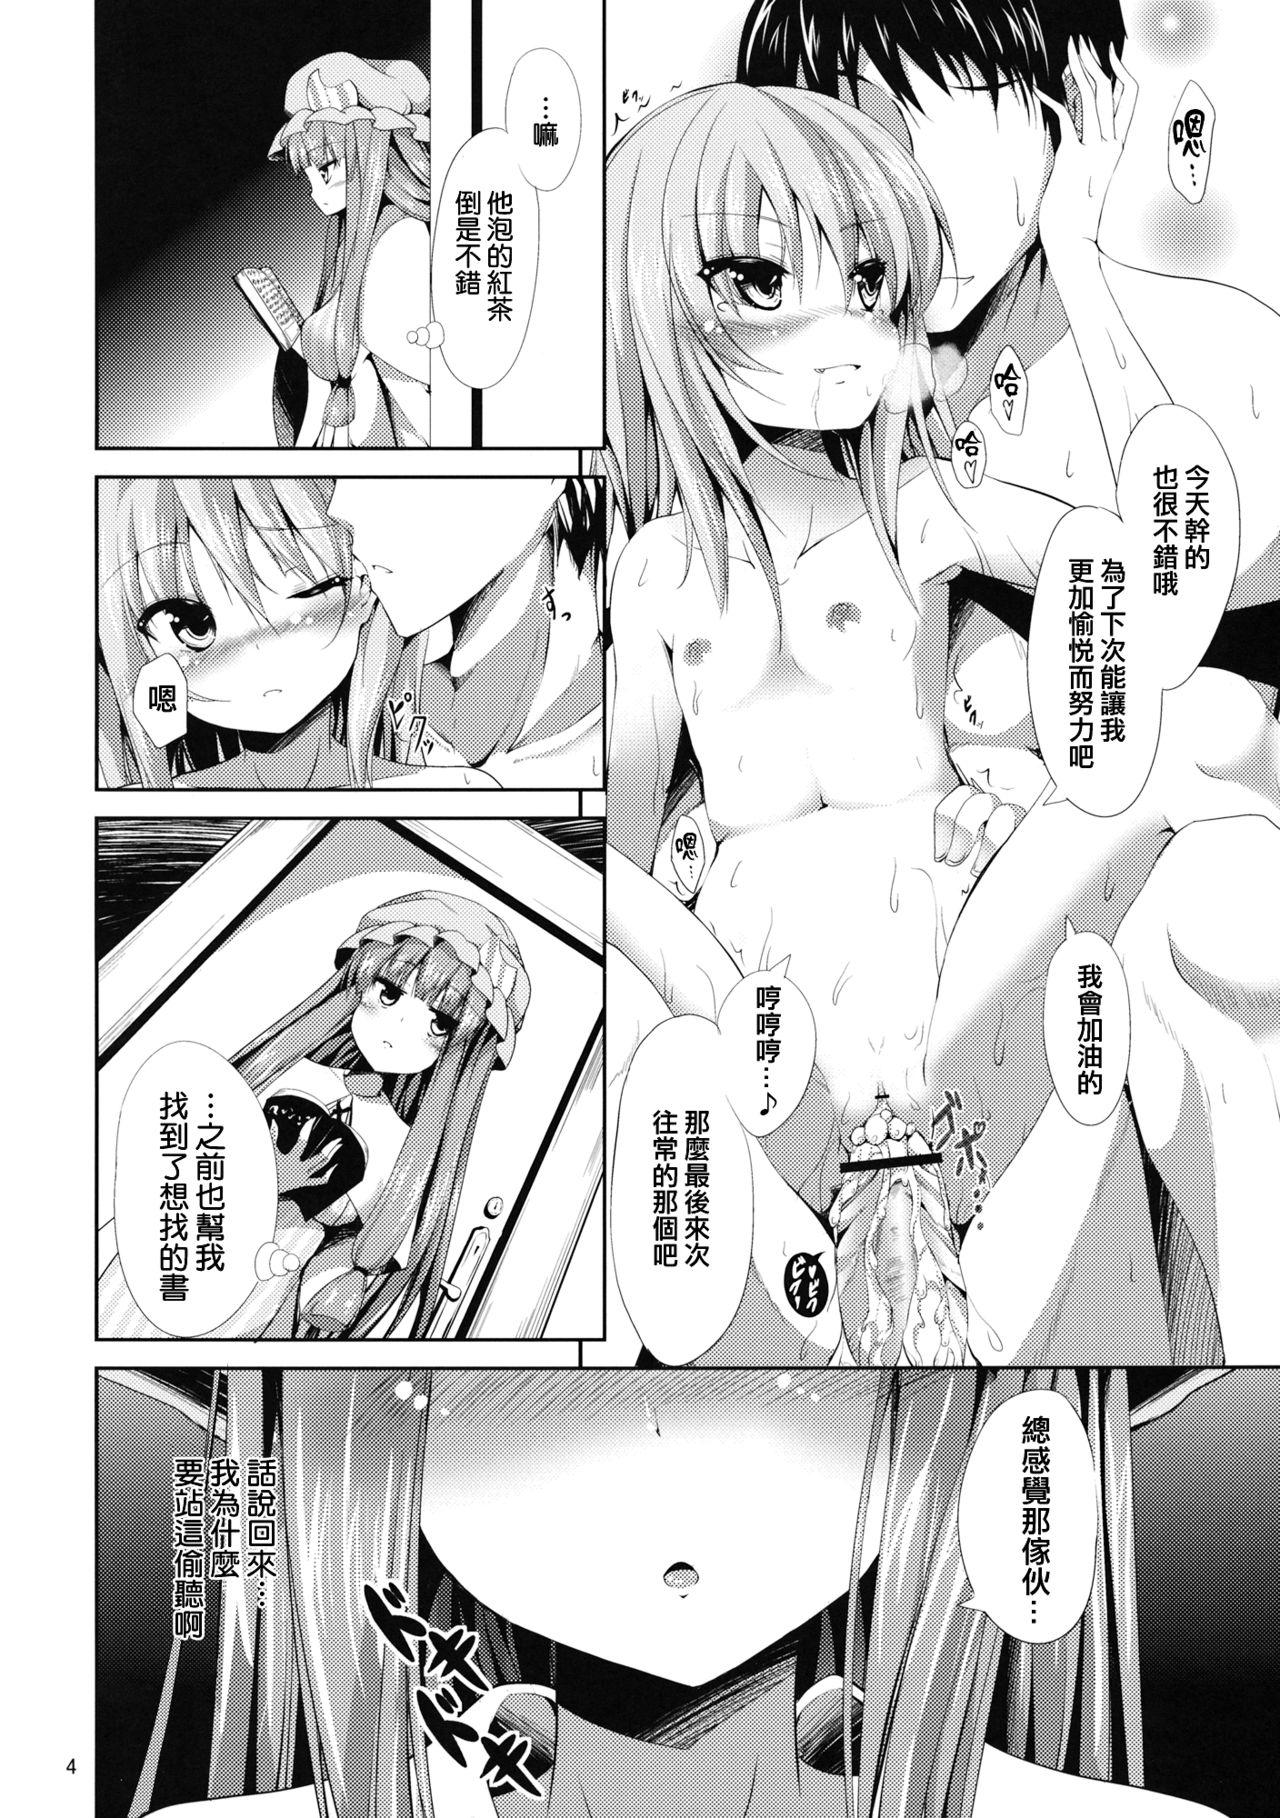 Submissive Sweet nothingS - Touhou project Machine - Page 4